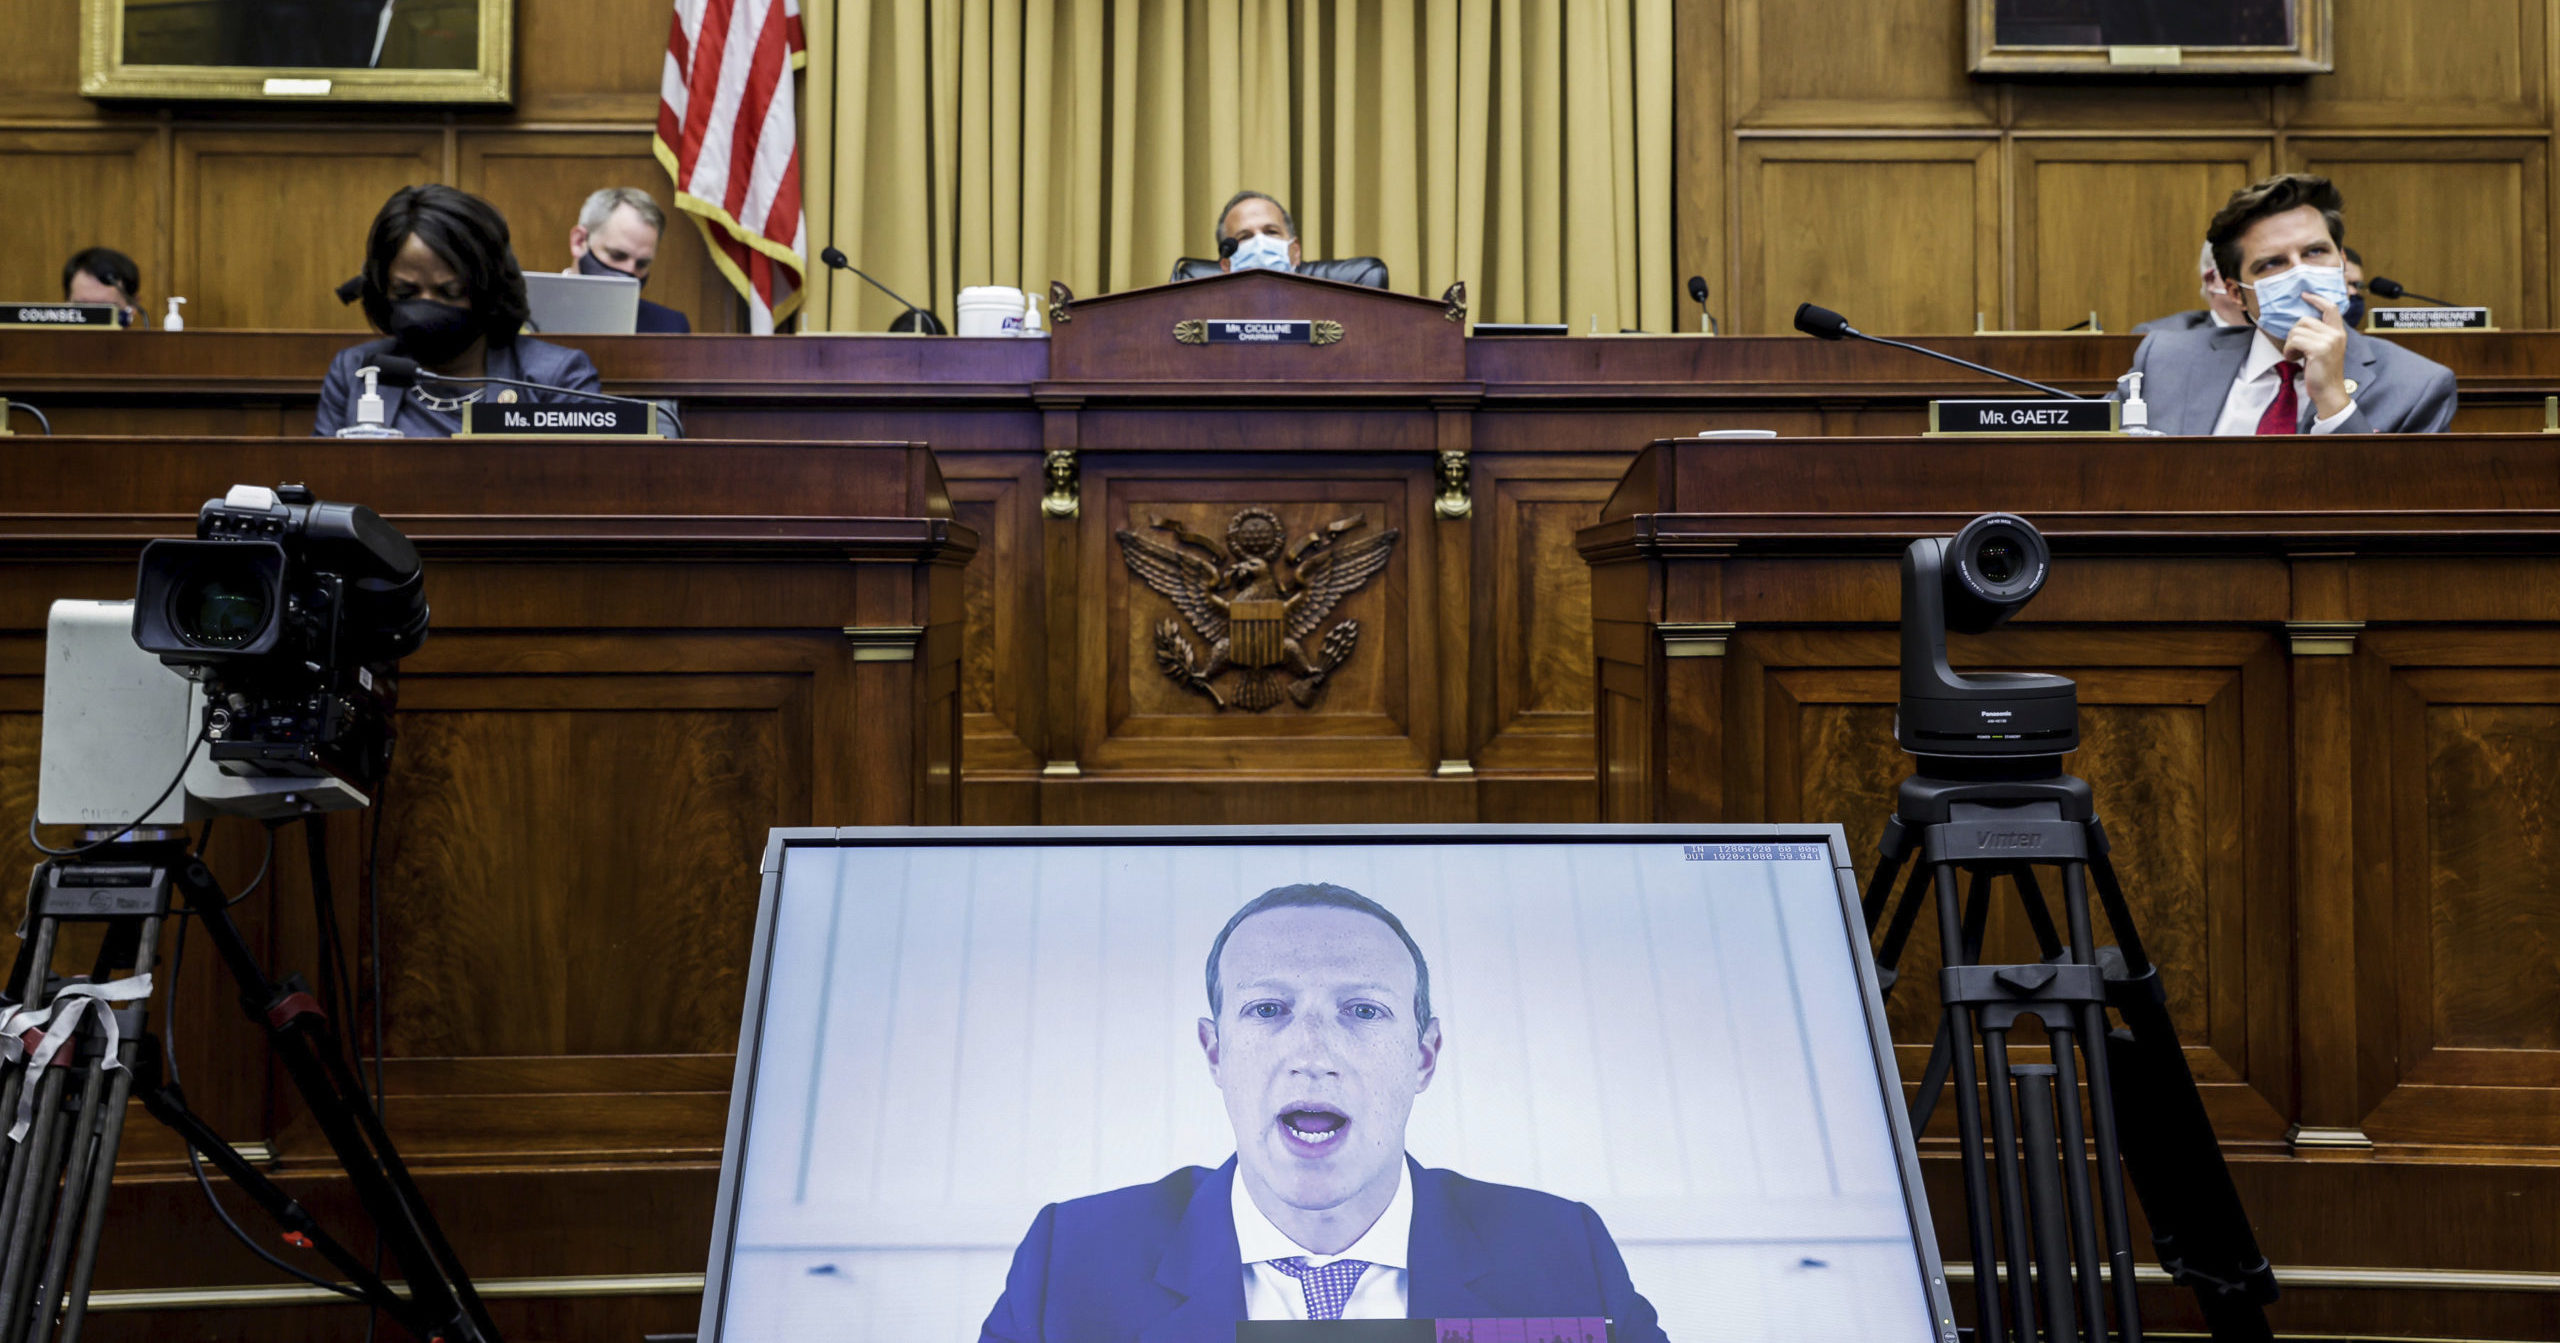 Facebook CEO Mark Zuckerberg speaks via video conference during a House Judiciary subcommittee hearing on antitrust on Capitol Hill on July 29, 2020, in Washington, D.C.